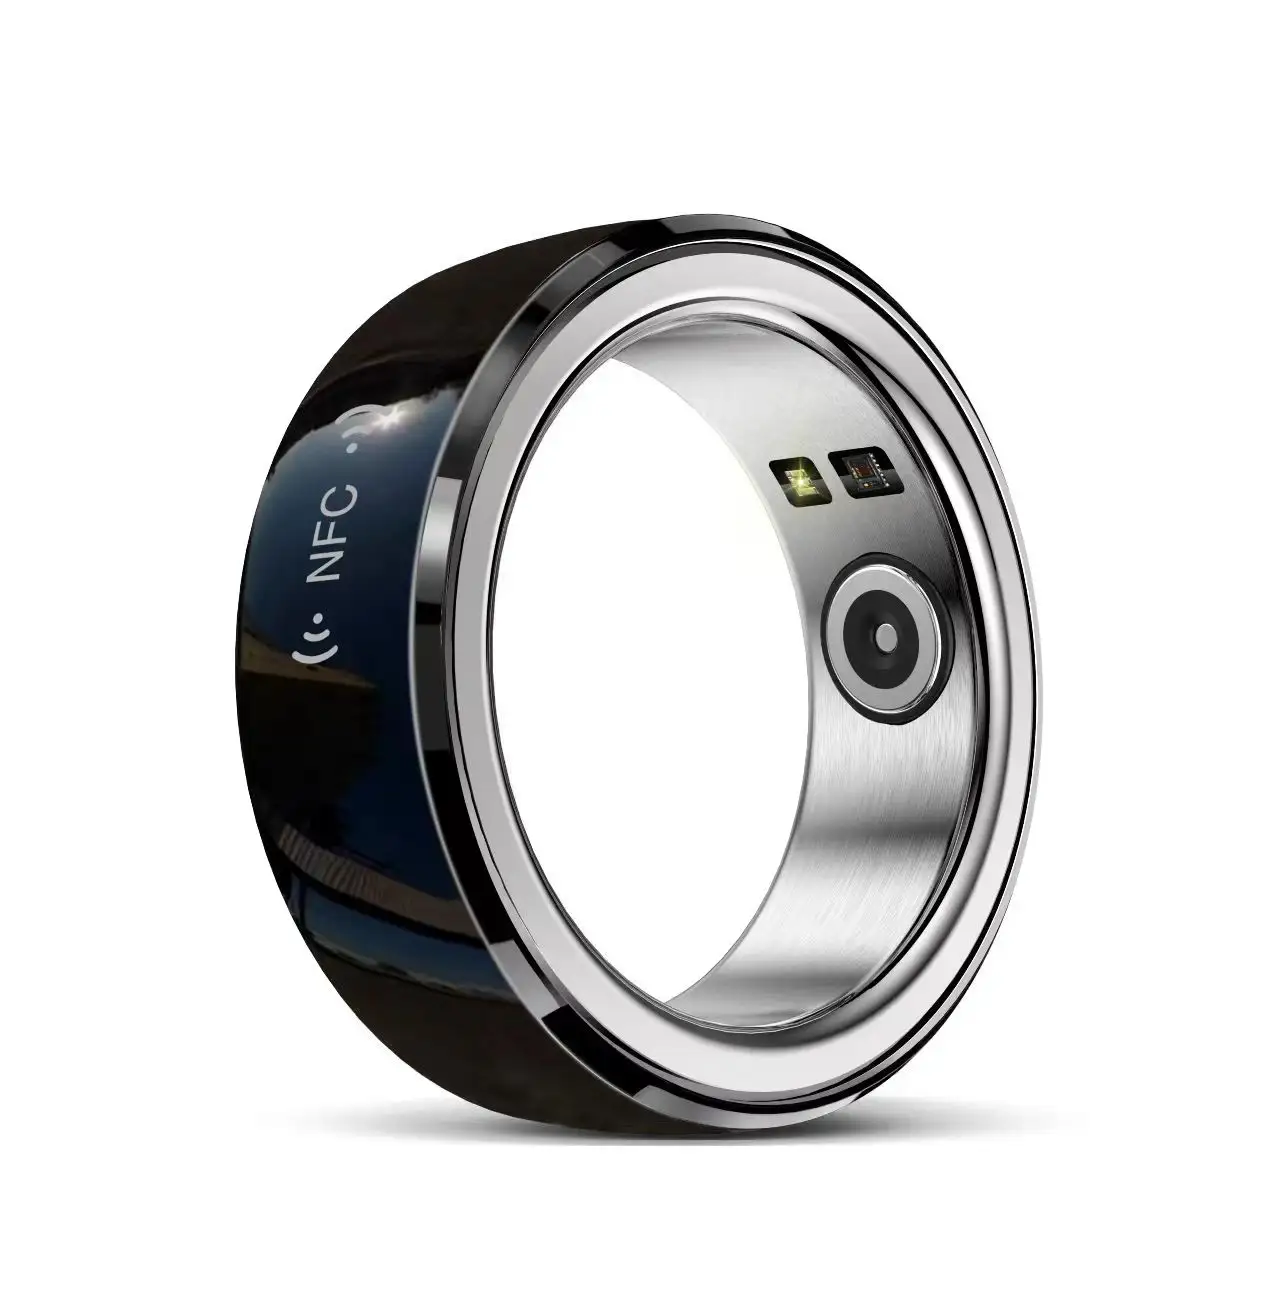 Fitness walking outdoor running innovative science and technology R2 smart ring